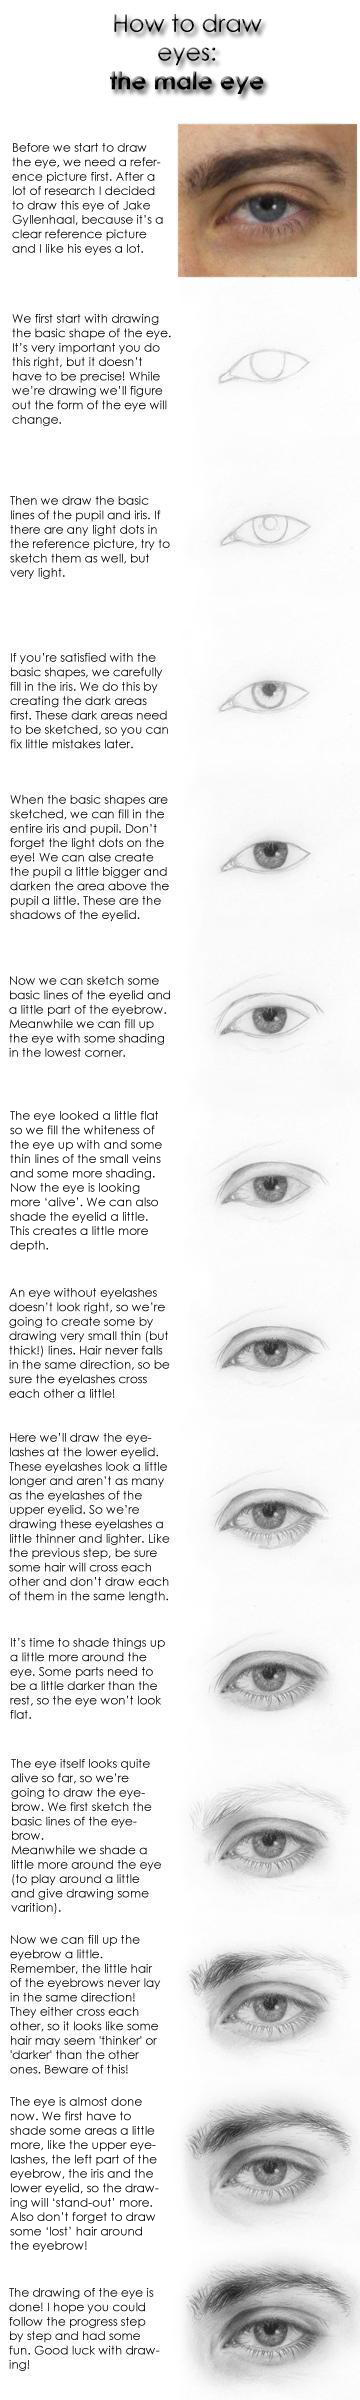 Tutorial: how to draw eyes